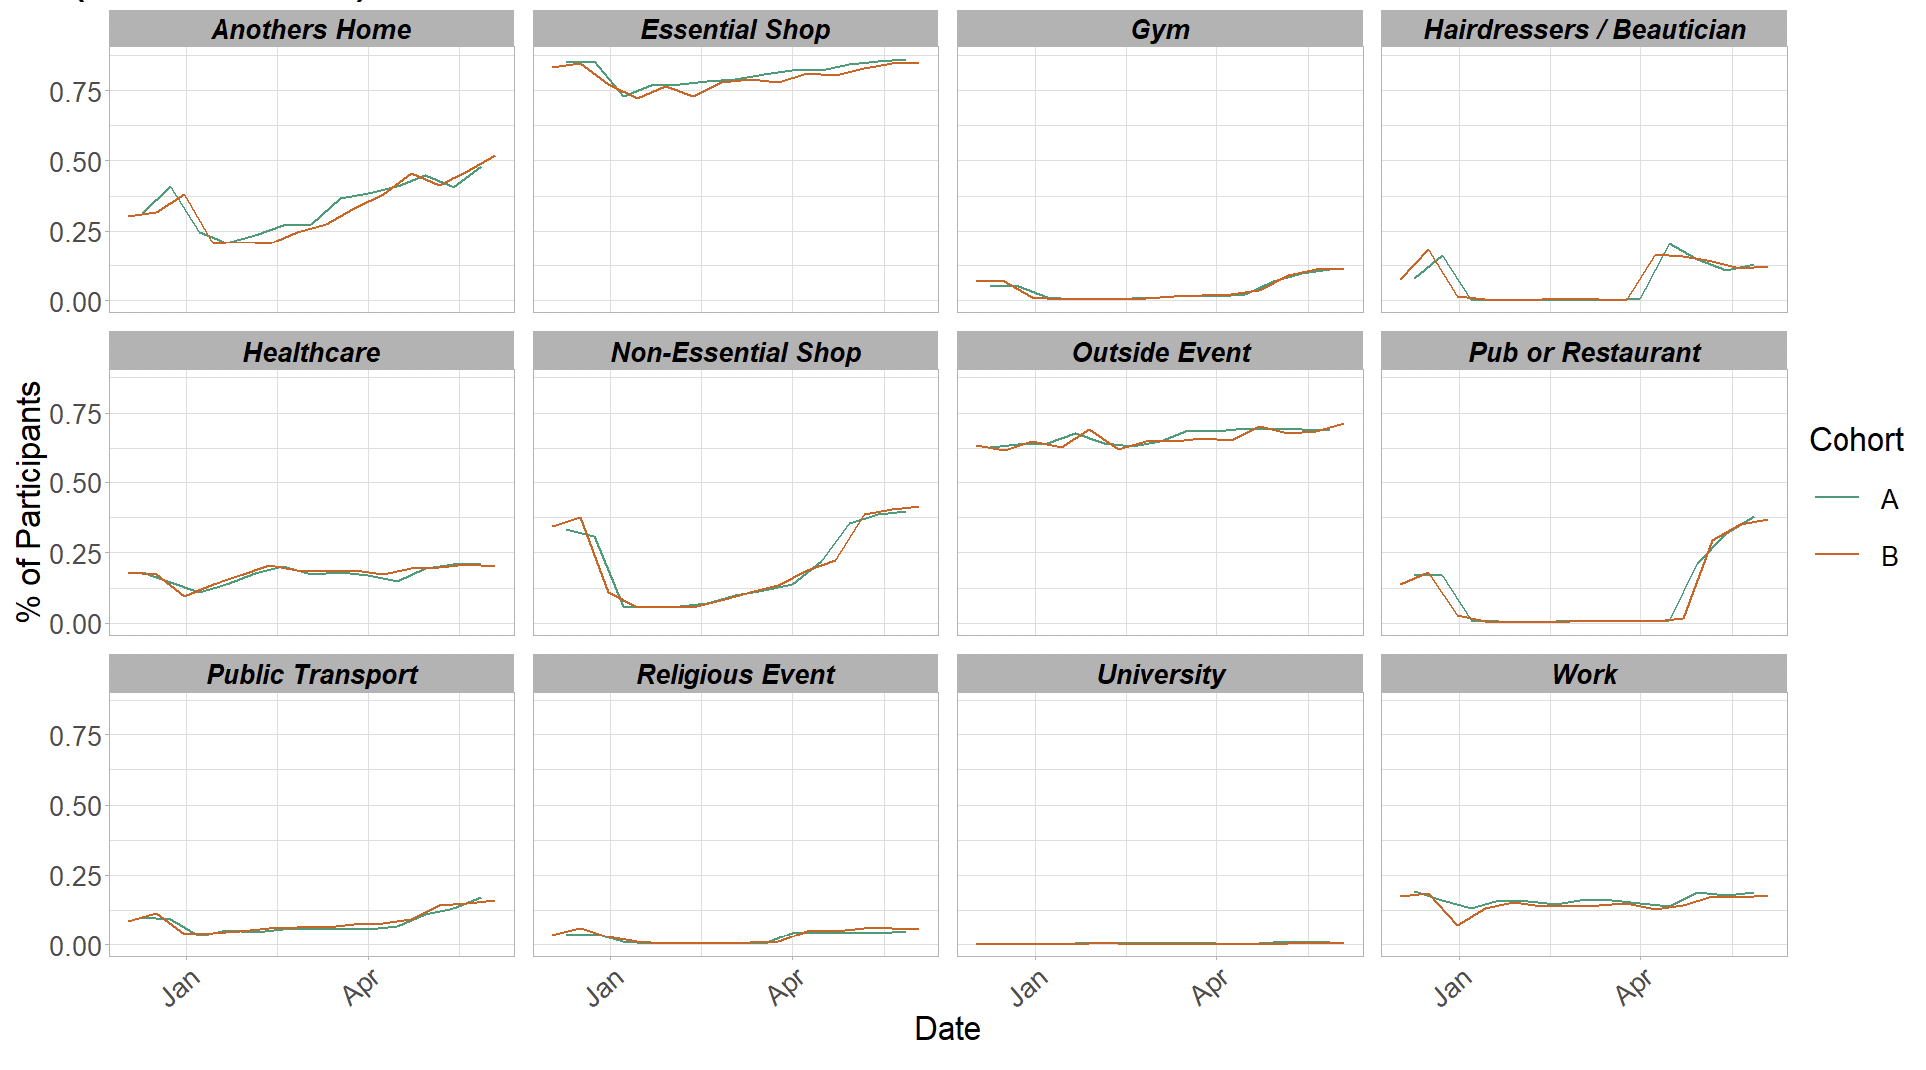 Figure 6. A series of line graphs showing locations visited by participants at least once for panel A and B in various settings.